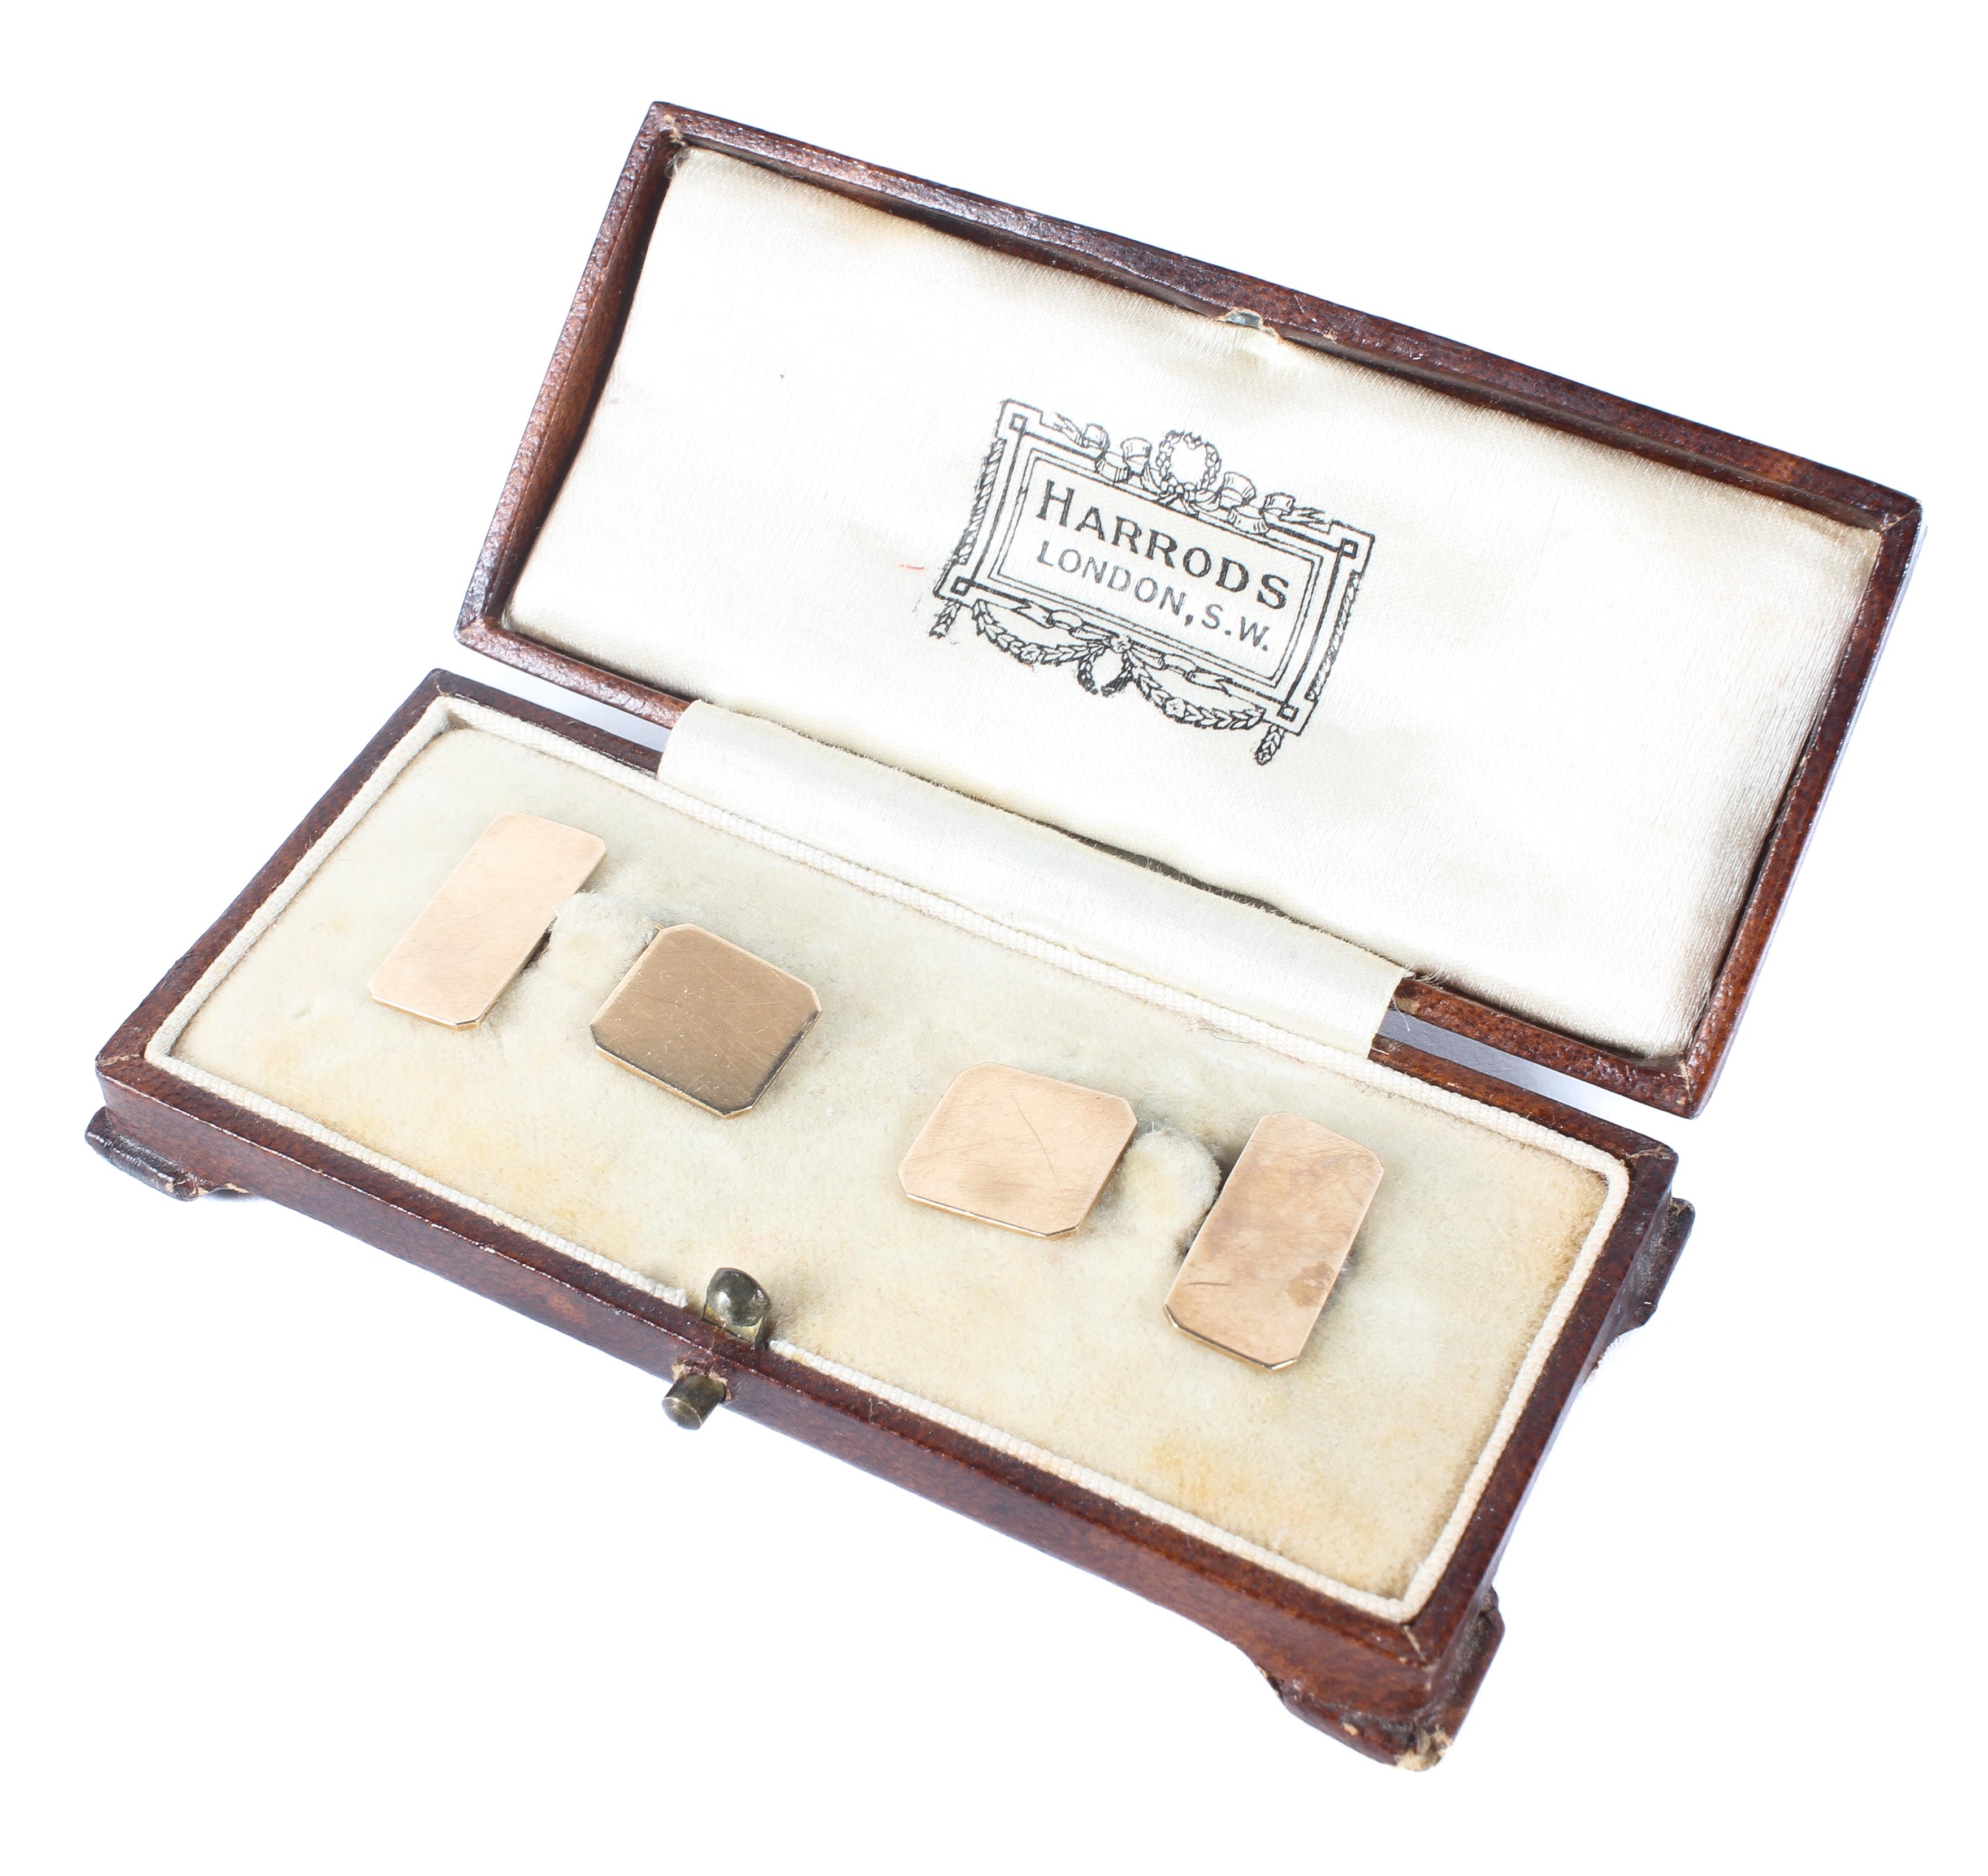 A pair of gents 9ct gold cufflinks, housed in a fitted leather Harrods box,